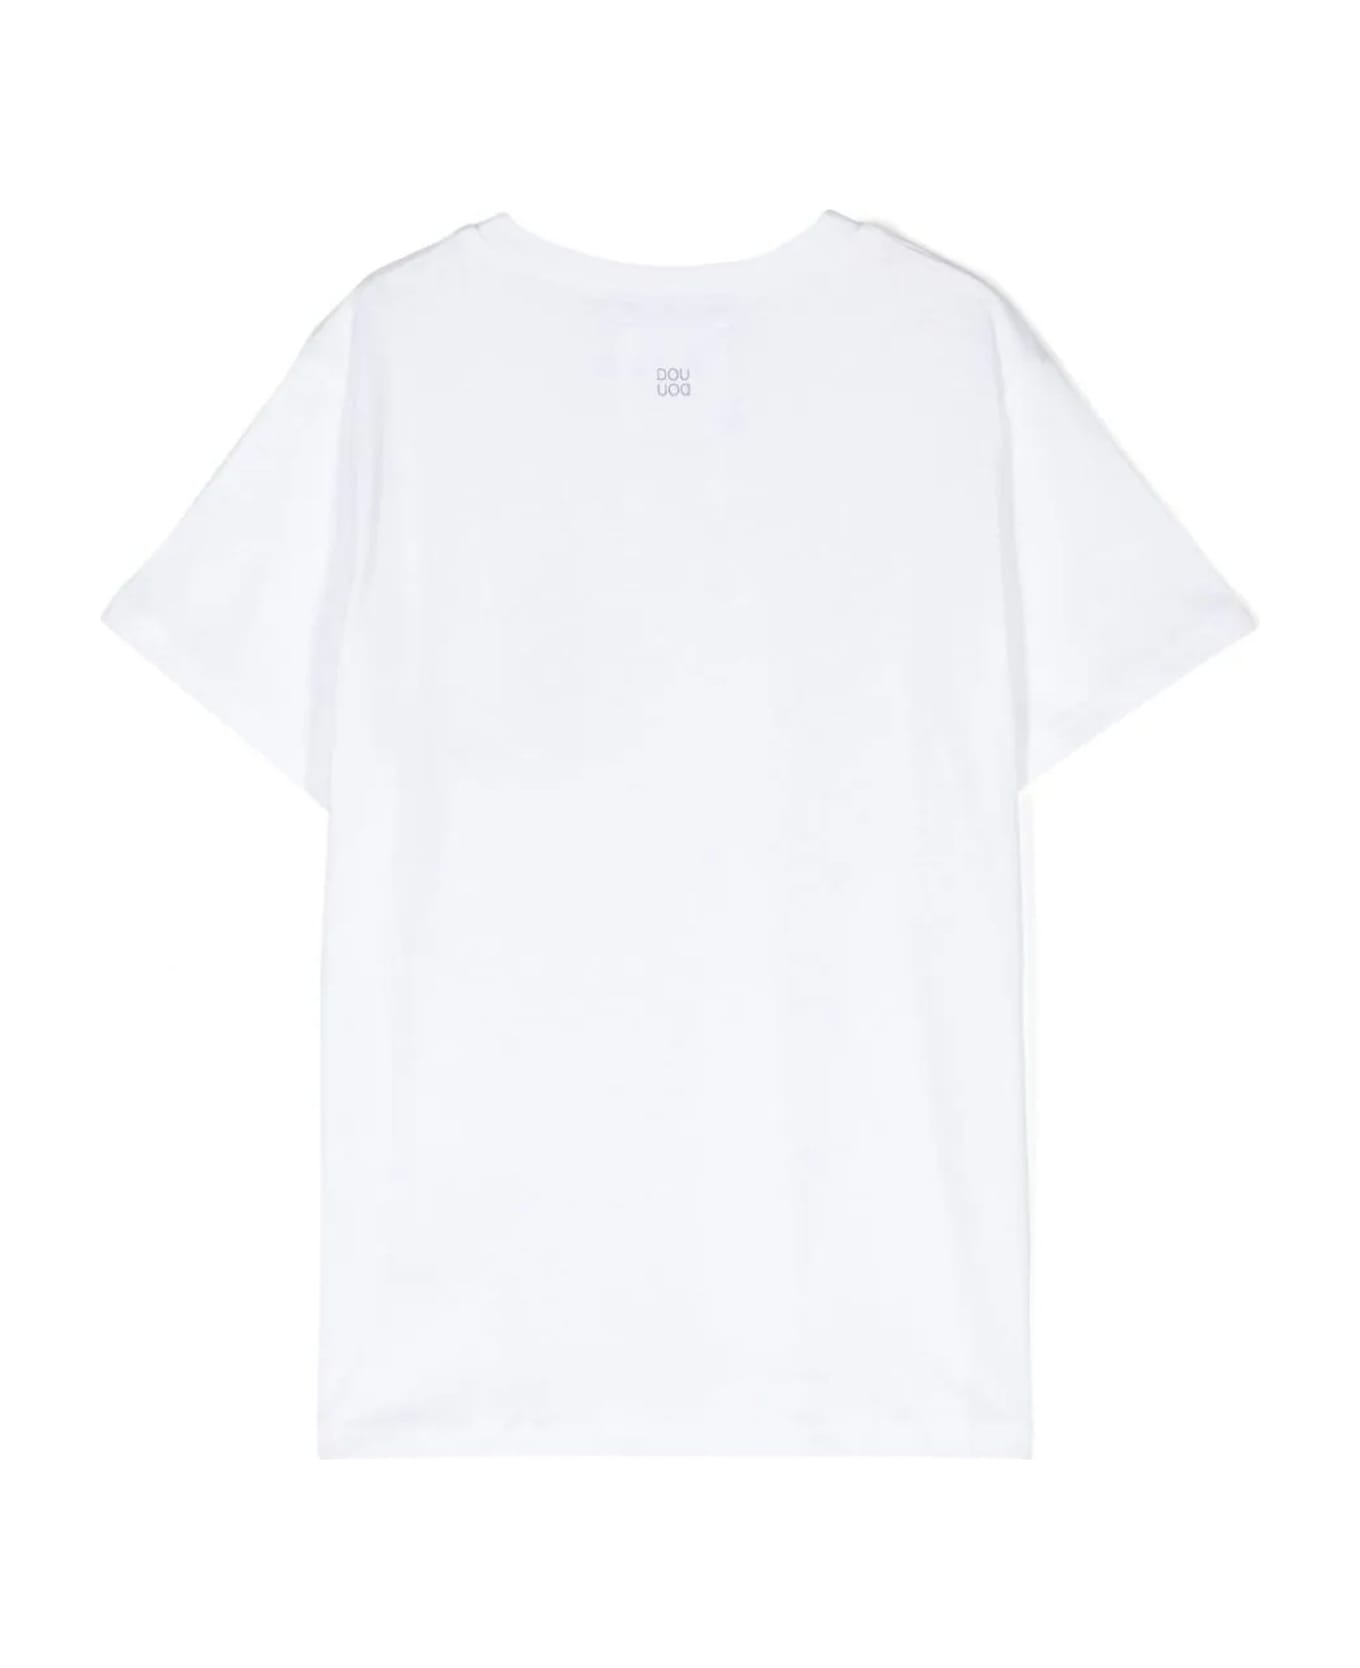 Douuod T-shirts And Polos White - White